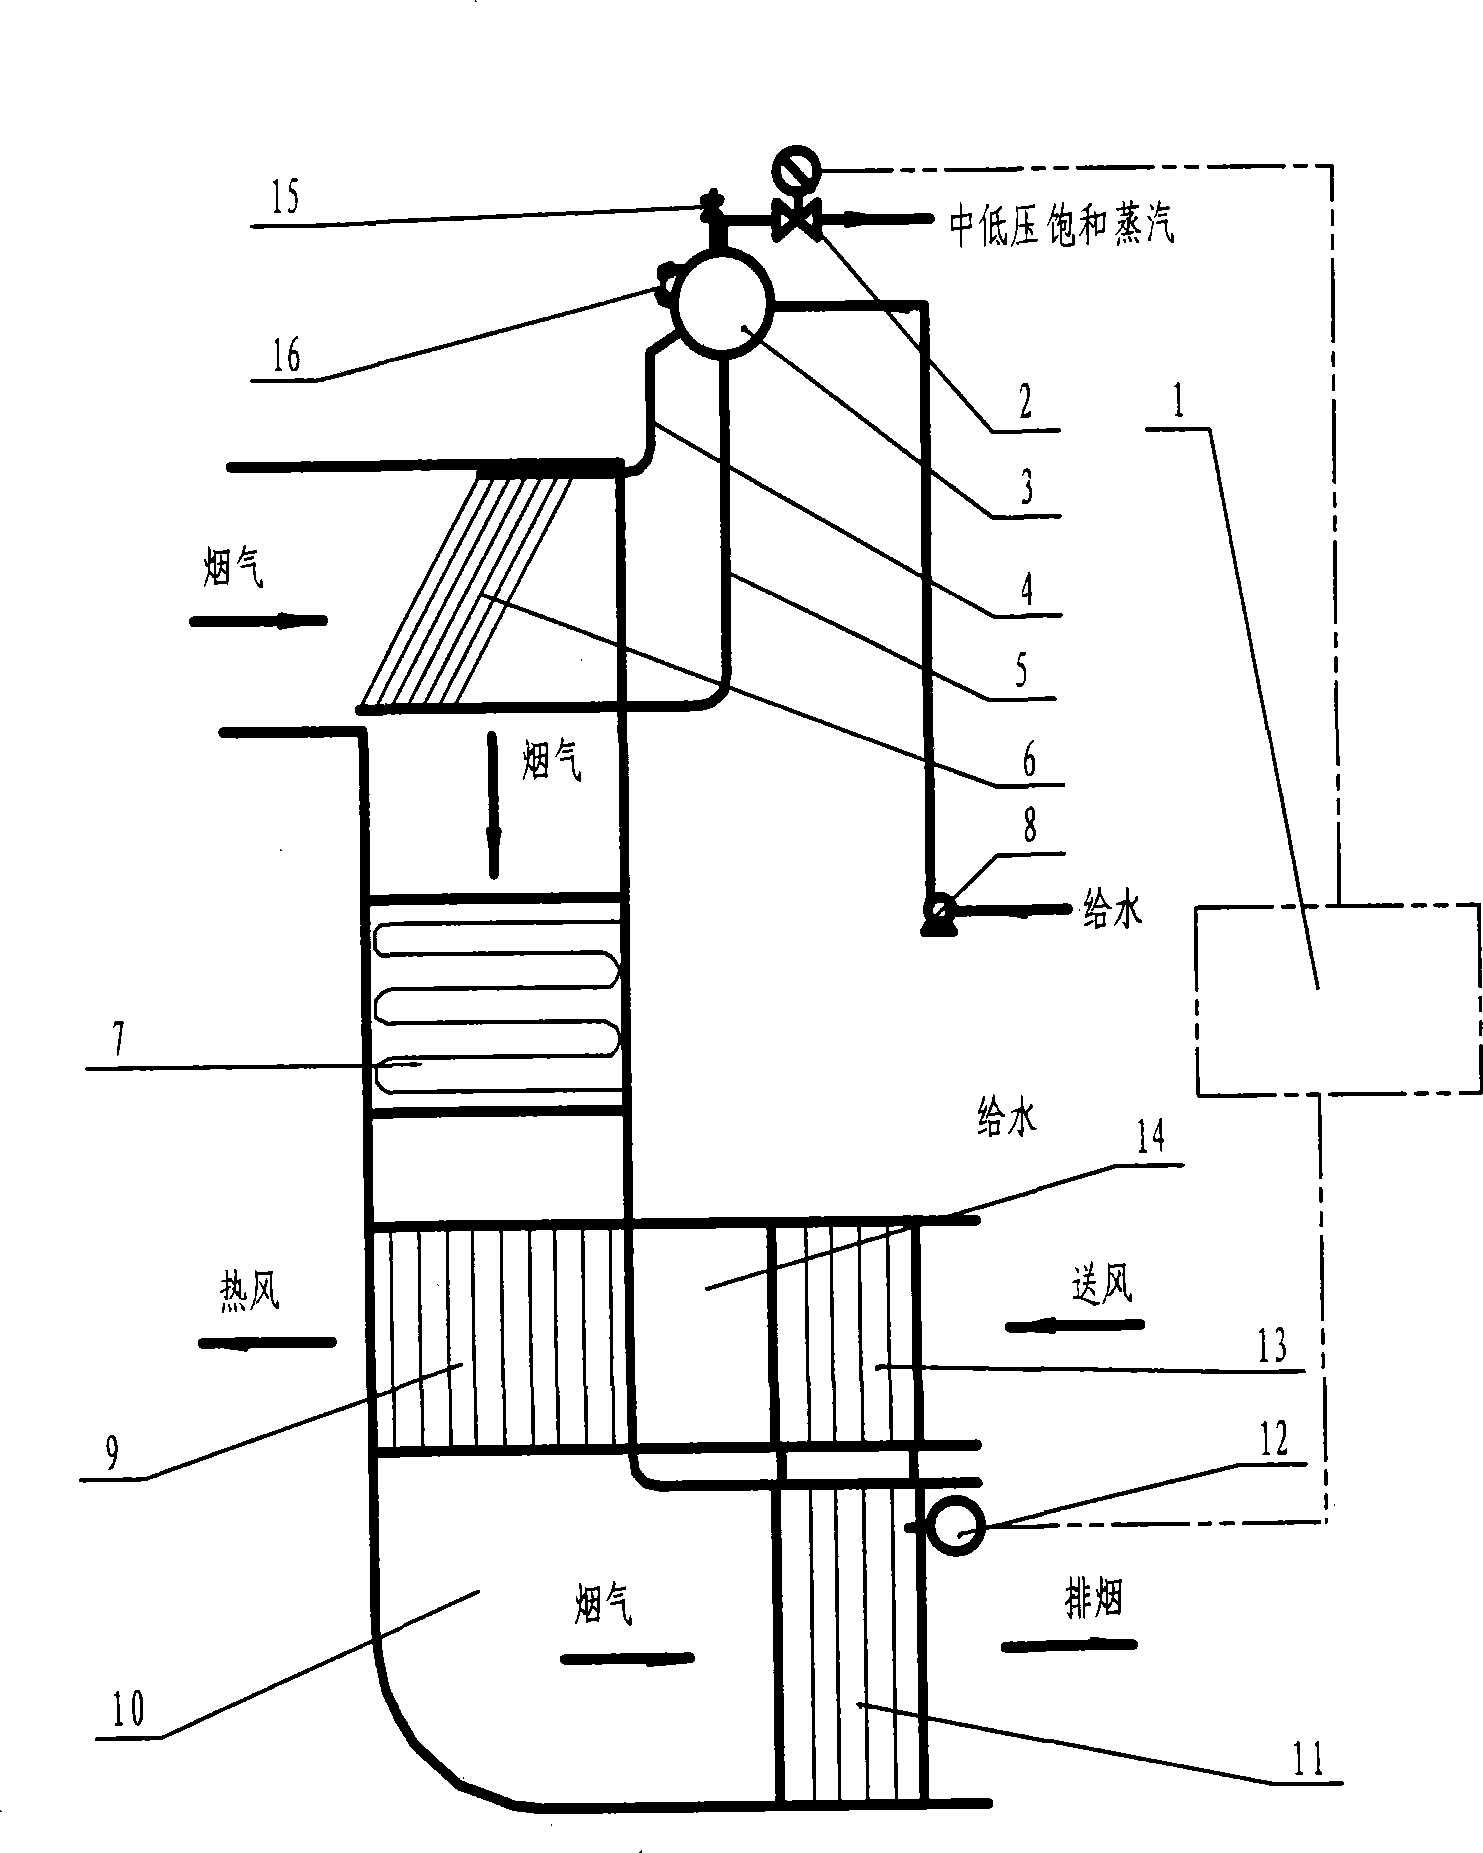 Composite phase change heat exchanger with medium and low pressure